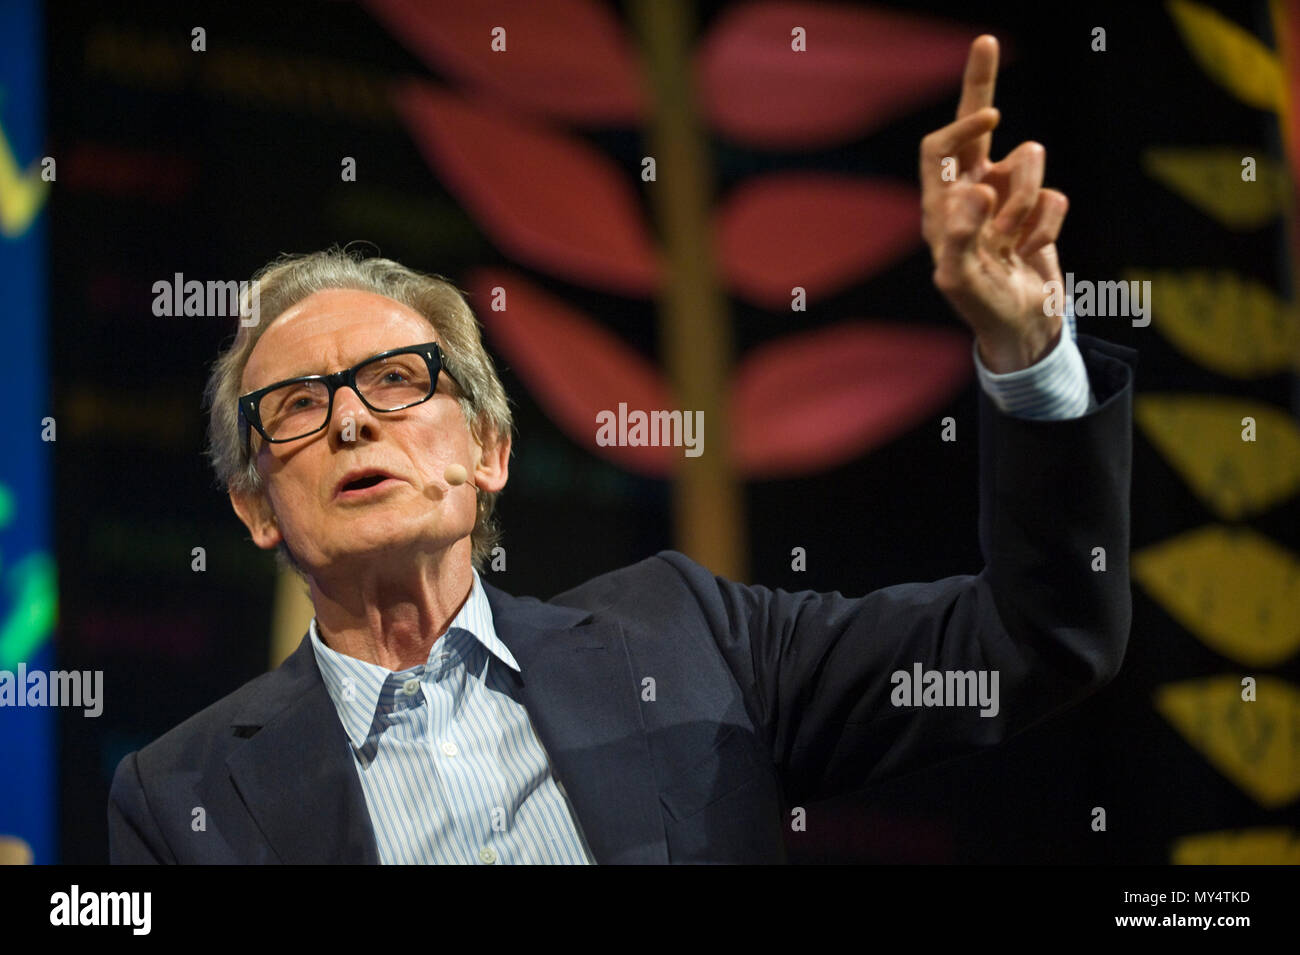 Bill Nighy speaking on stage at Hay Festival 2018 Hay-on-Wye Powys Wales UK Stock Photo